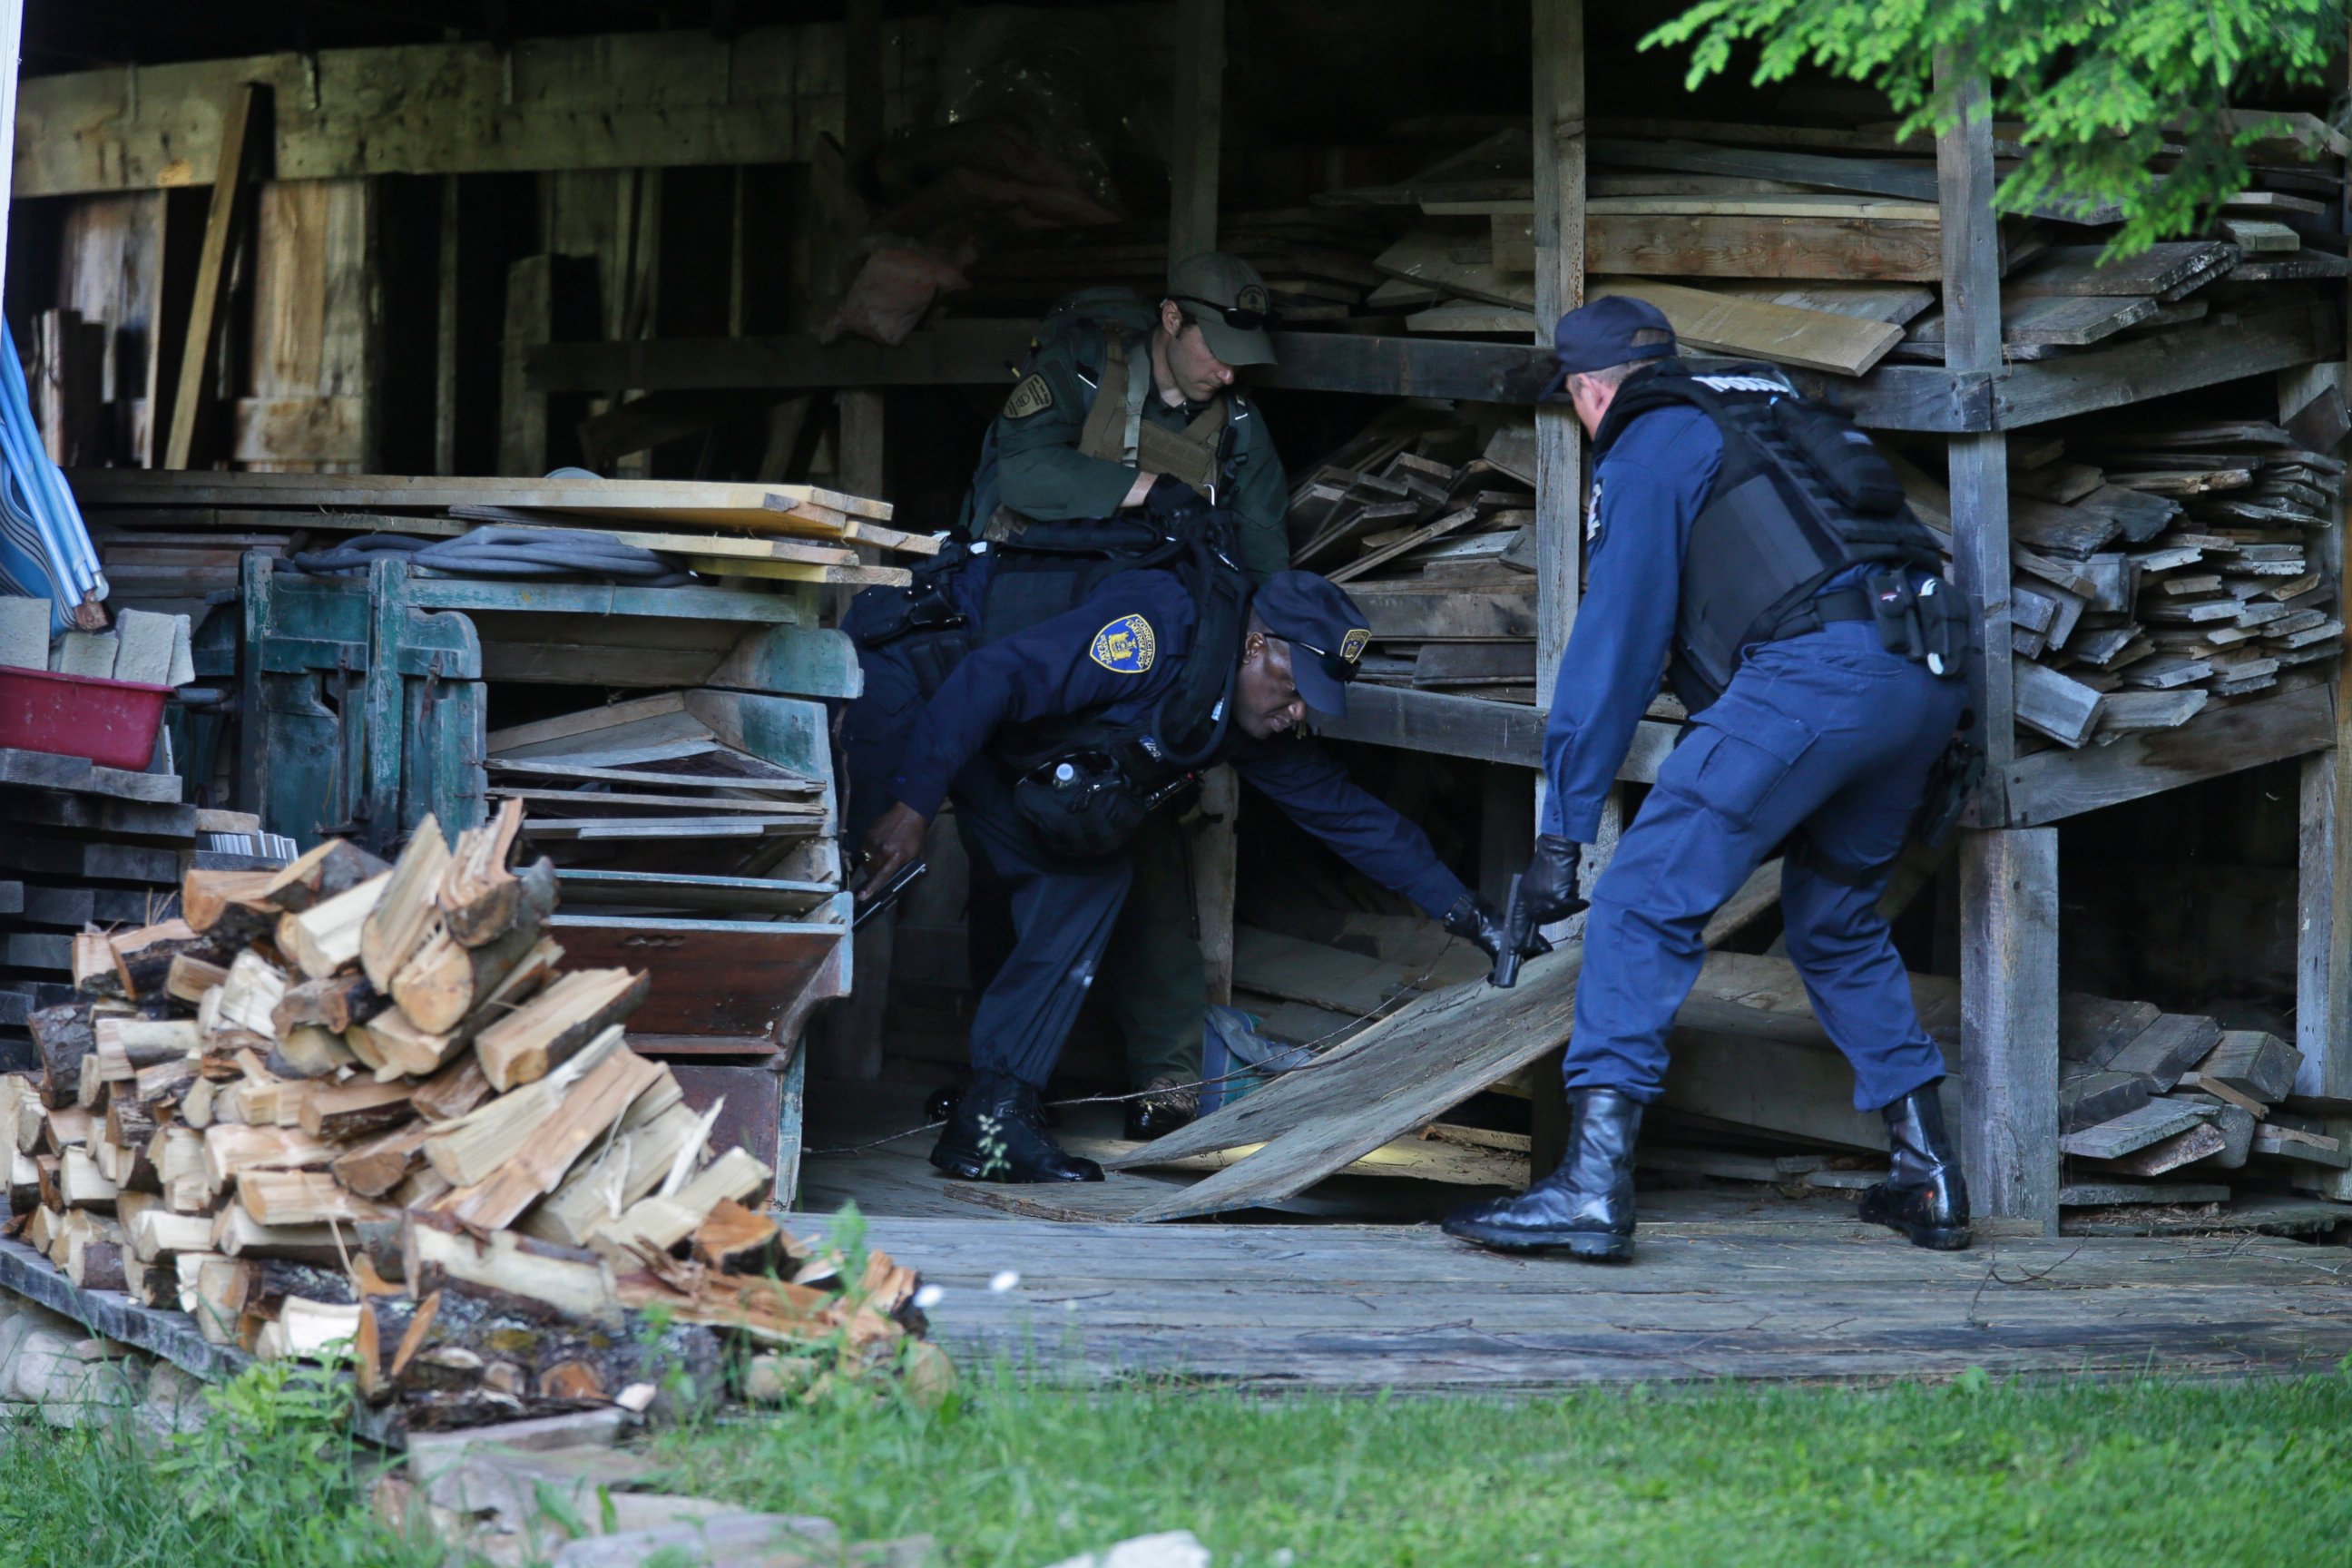 PHOTO: New York State Department of Corrections Officers and a forest ranger search a barn in Owls Head, N.Y. for convicted murderers Richard Matt and David Sweat, June 26, 2015.